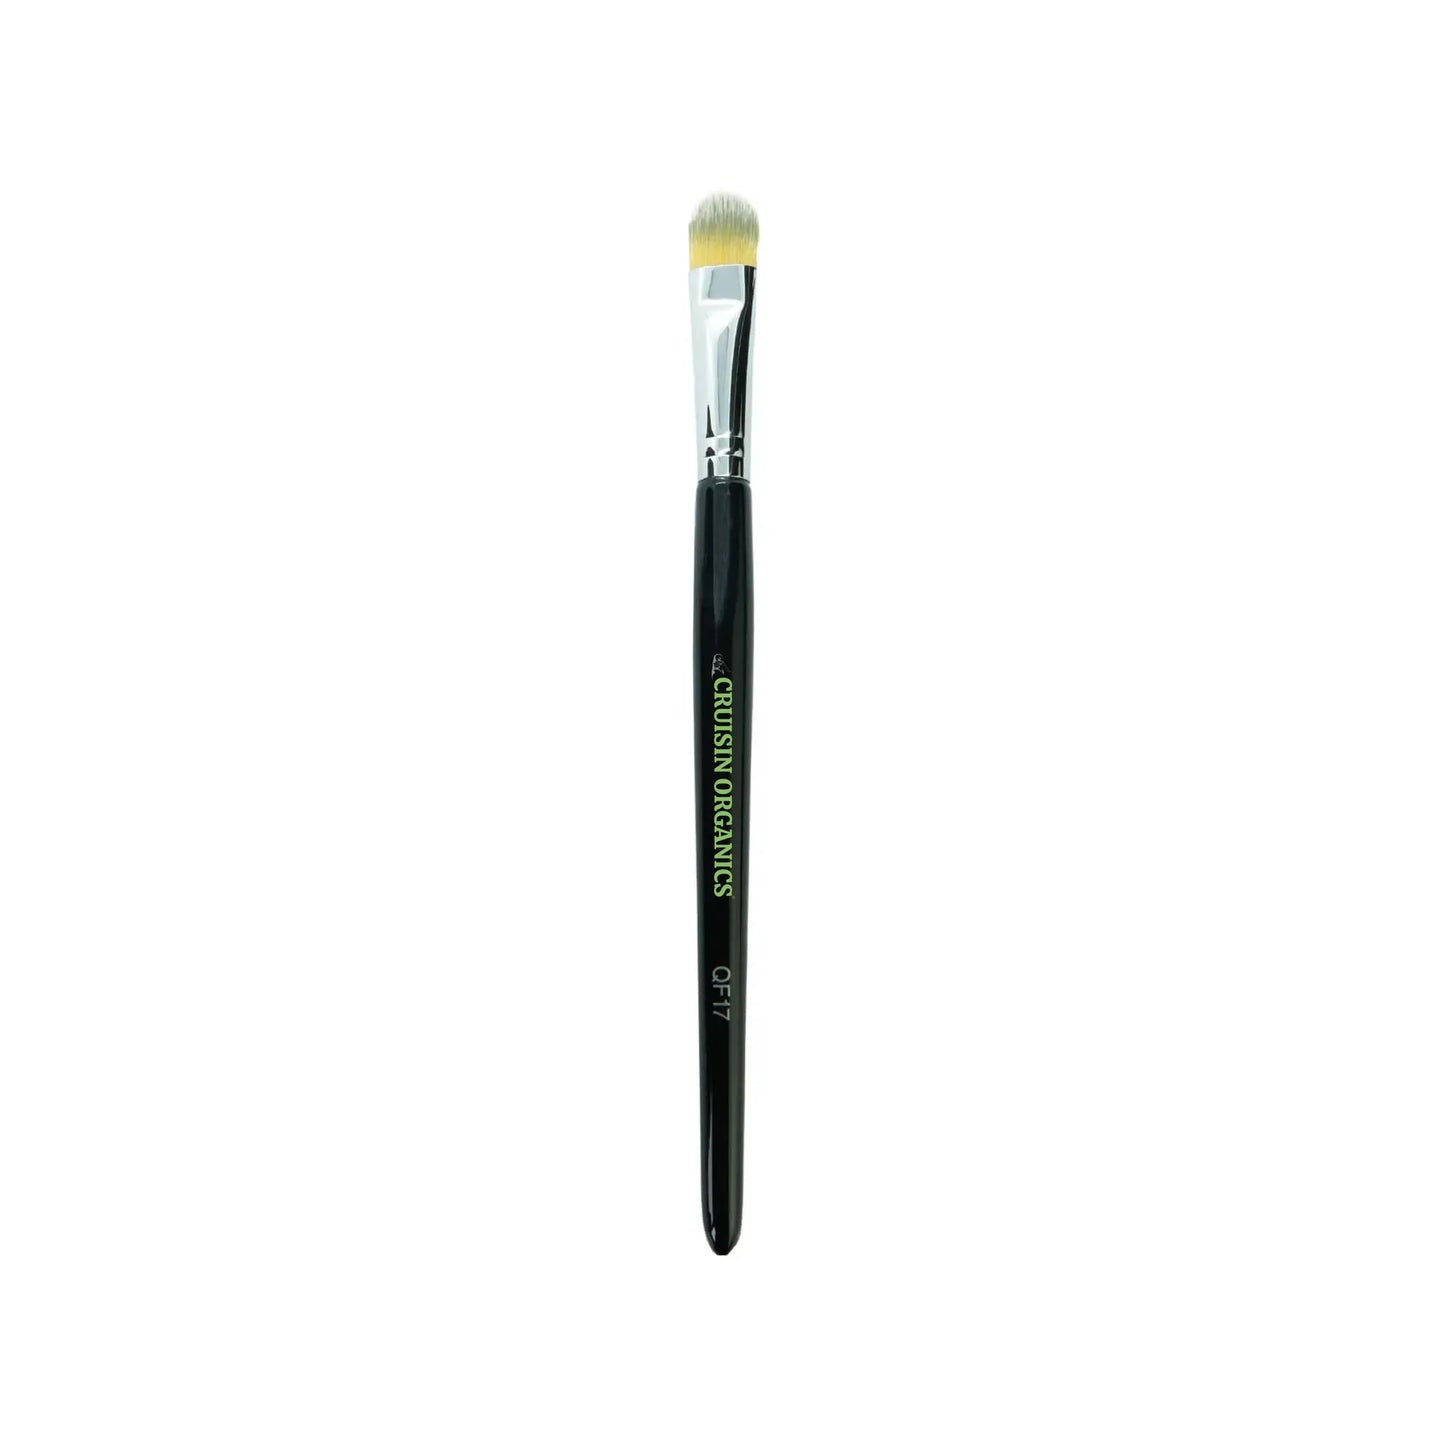 Cruisin Organics concealer brush that’s gentle on your skin. This brush has short, firm bristles that have been designed to easily pick up, apply, and blend cream or liquid concealers. The short, firm bristles allow for great product control and application.